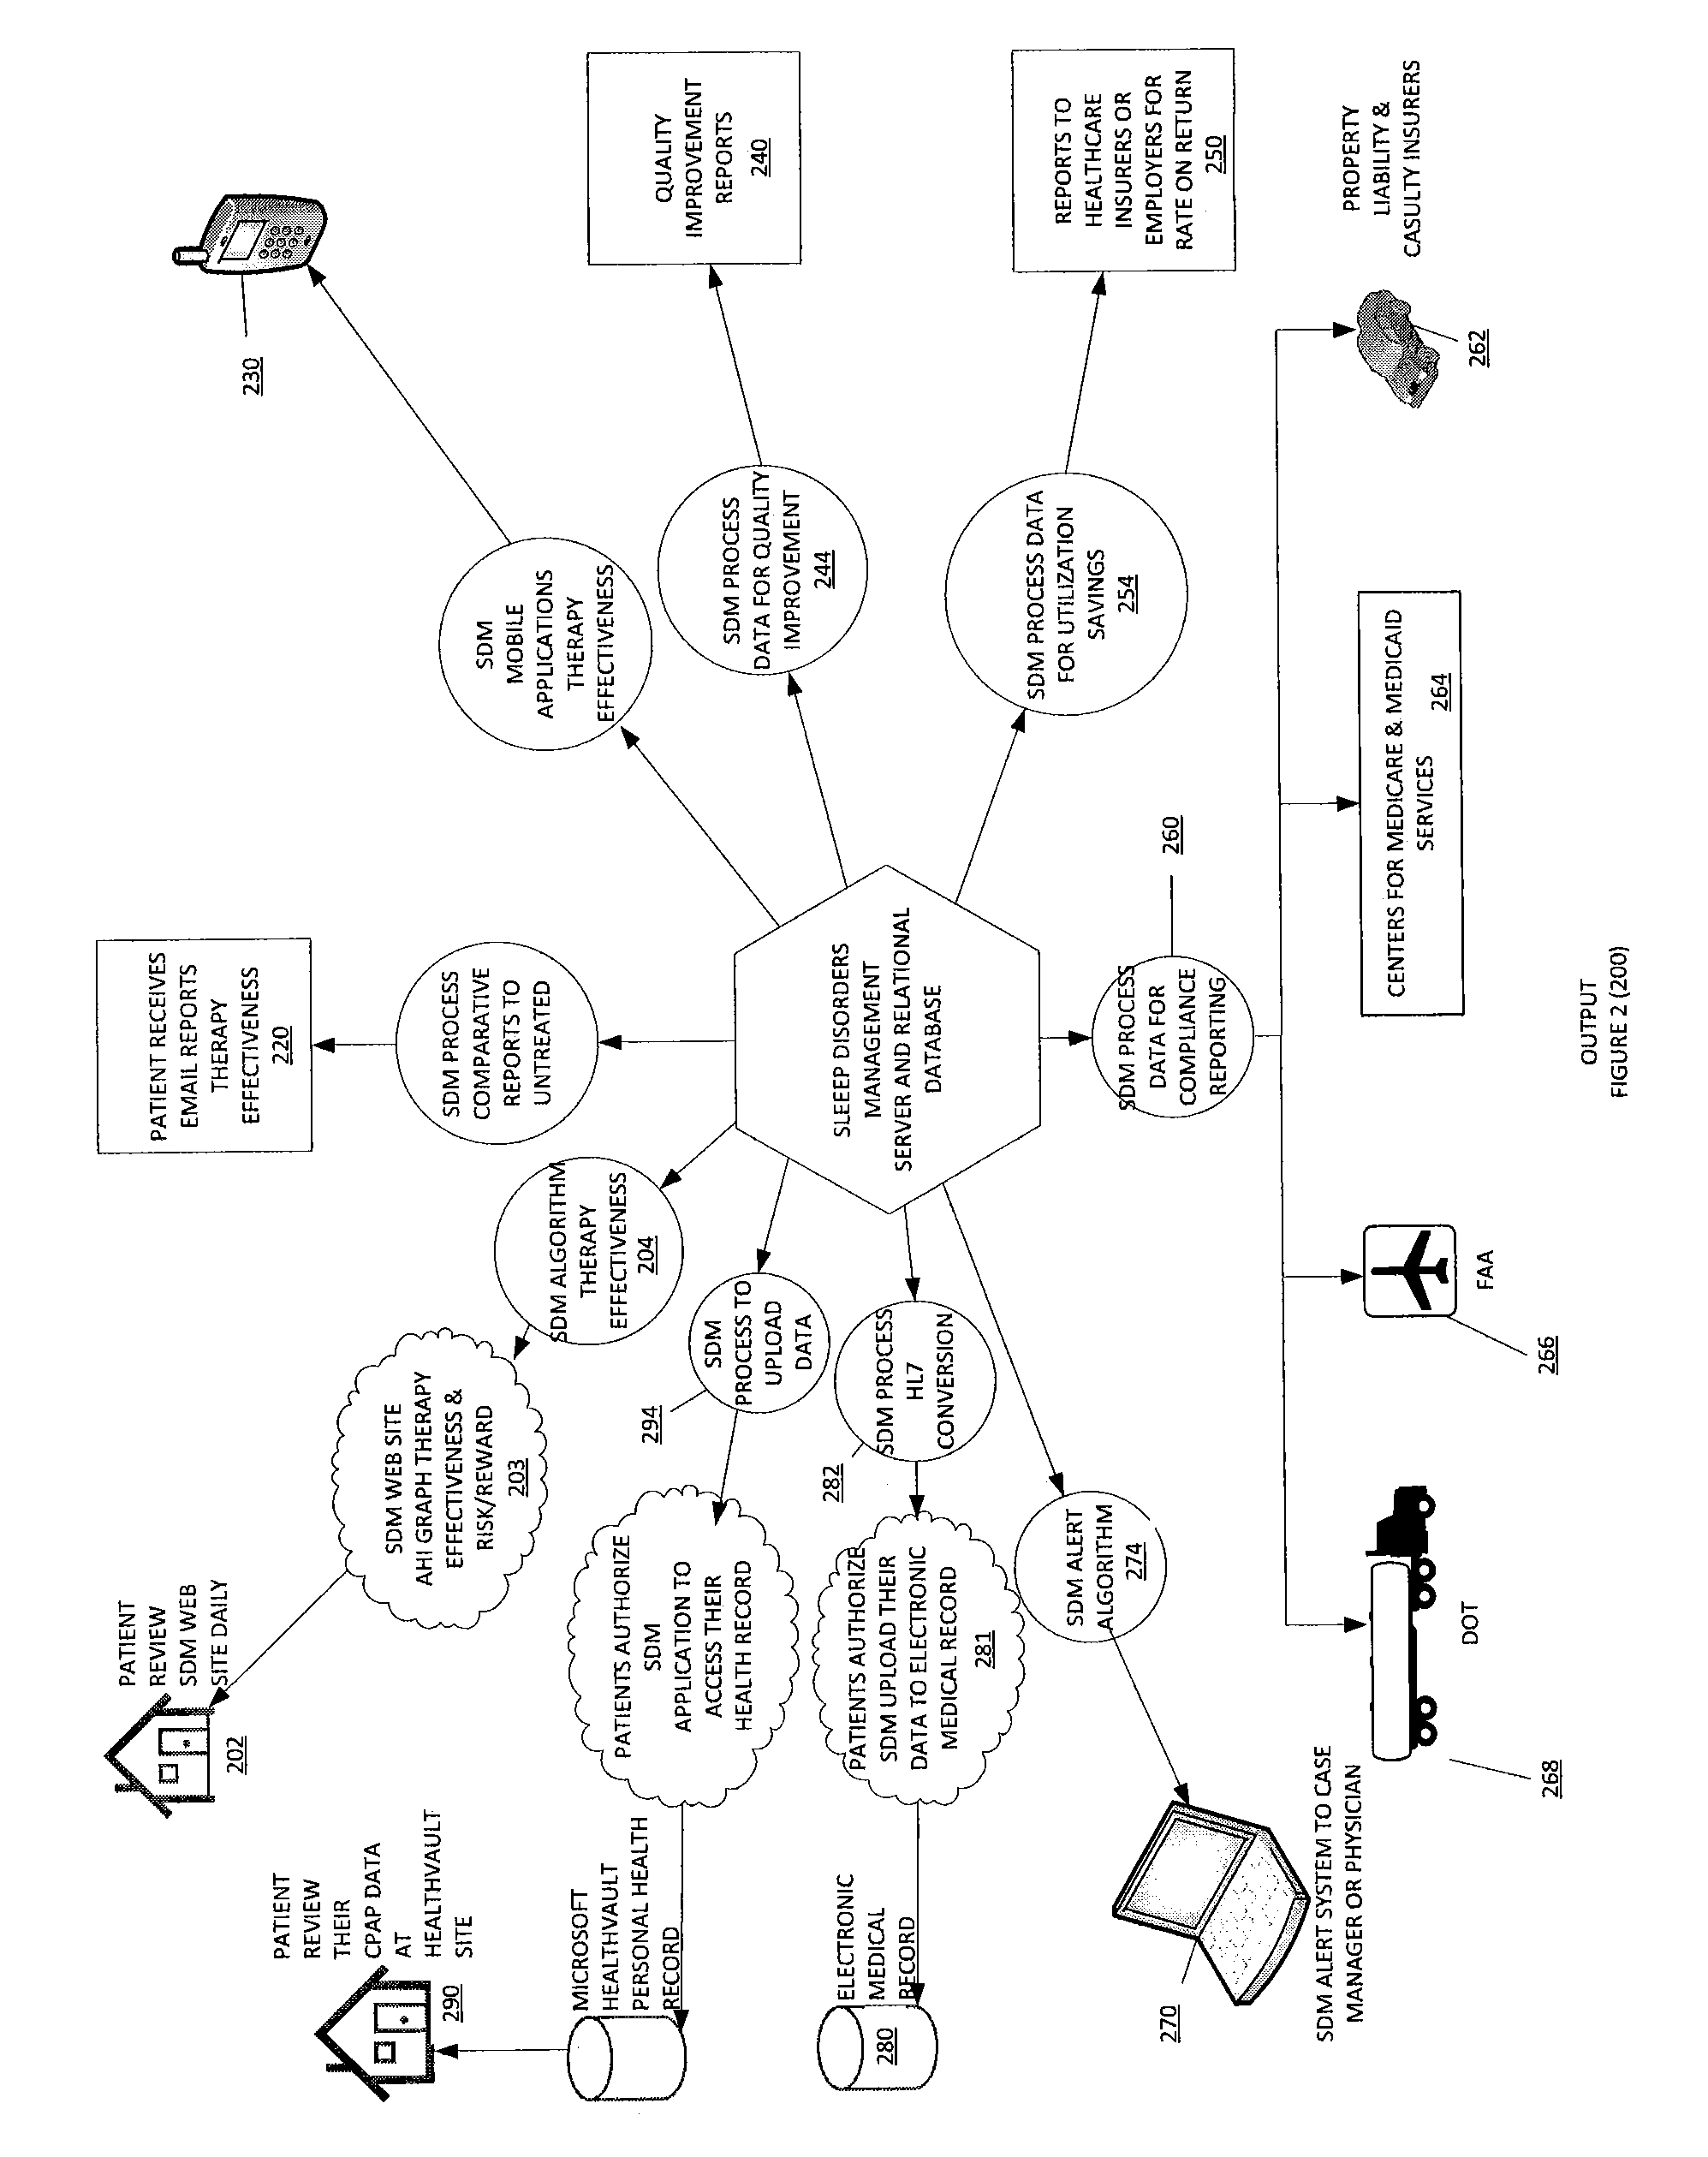 Systems and methods for diagnosing and treating sleep disorders